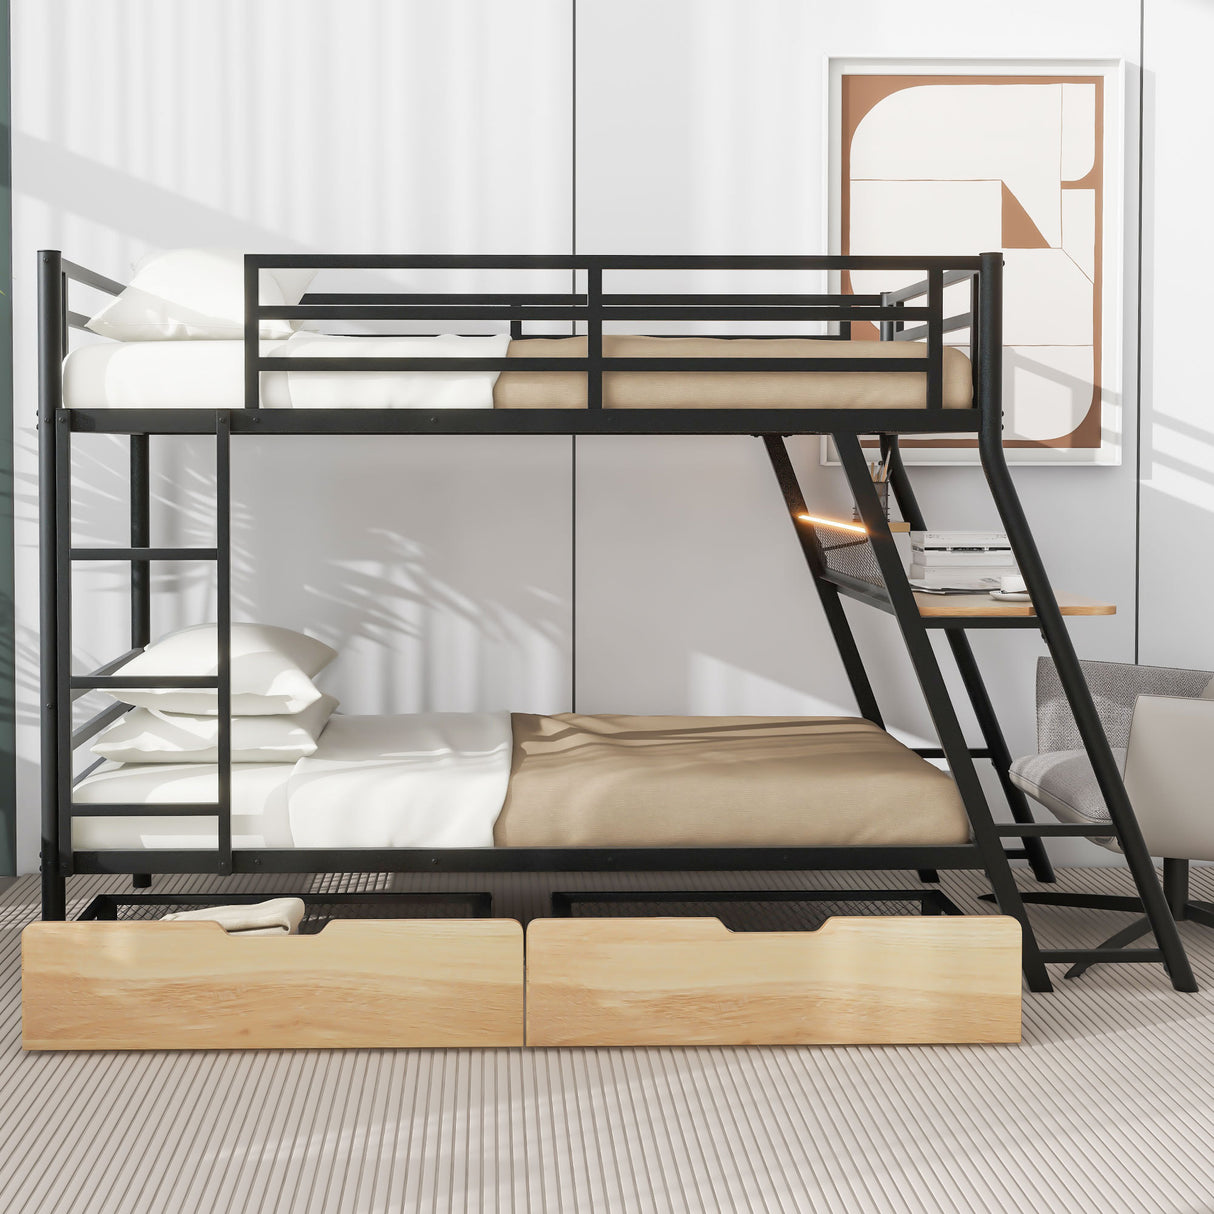 Twin Size Metal Bunk Bed with Built-in Desk, Light and 2 Drawers, Black(Expected Arrival Time: 9.18)